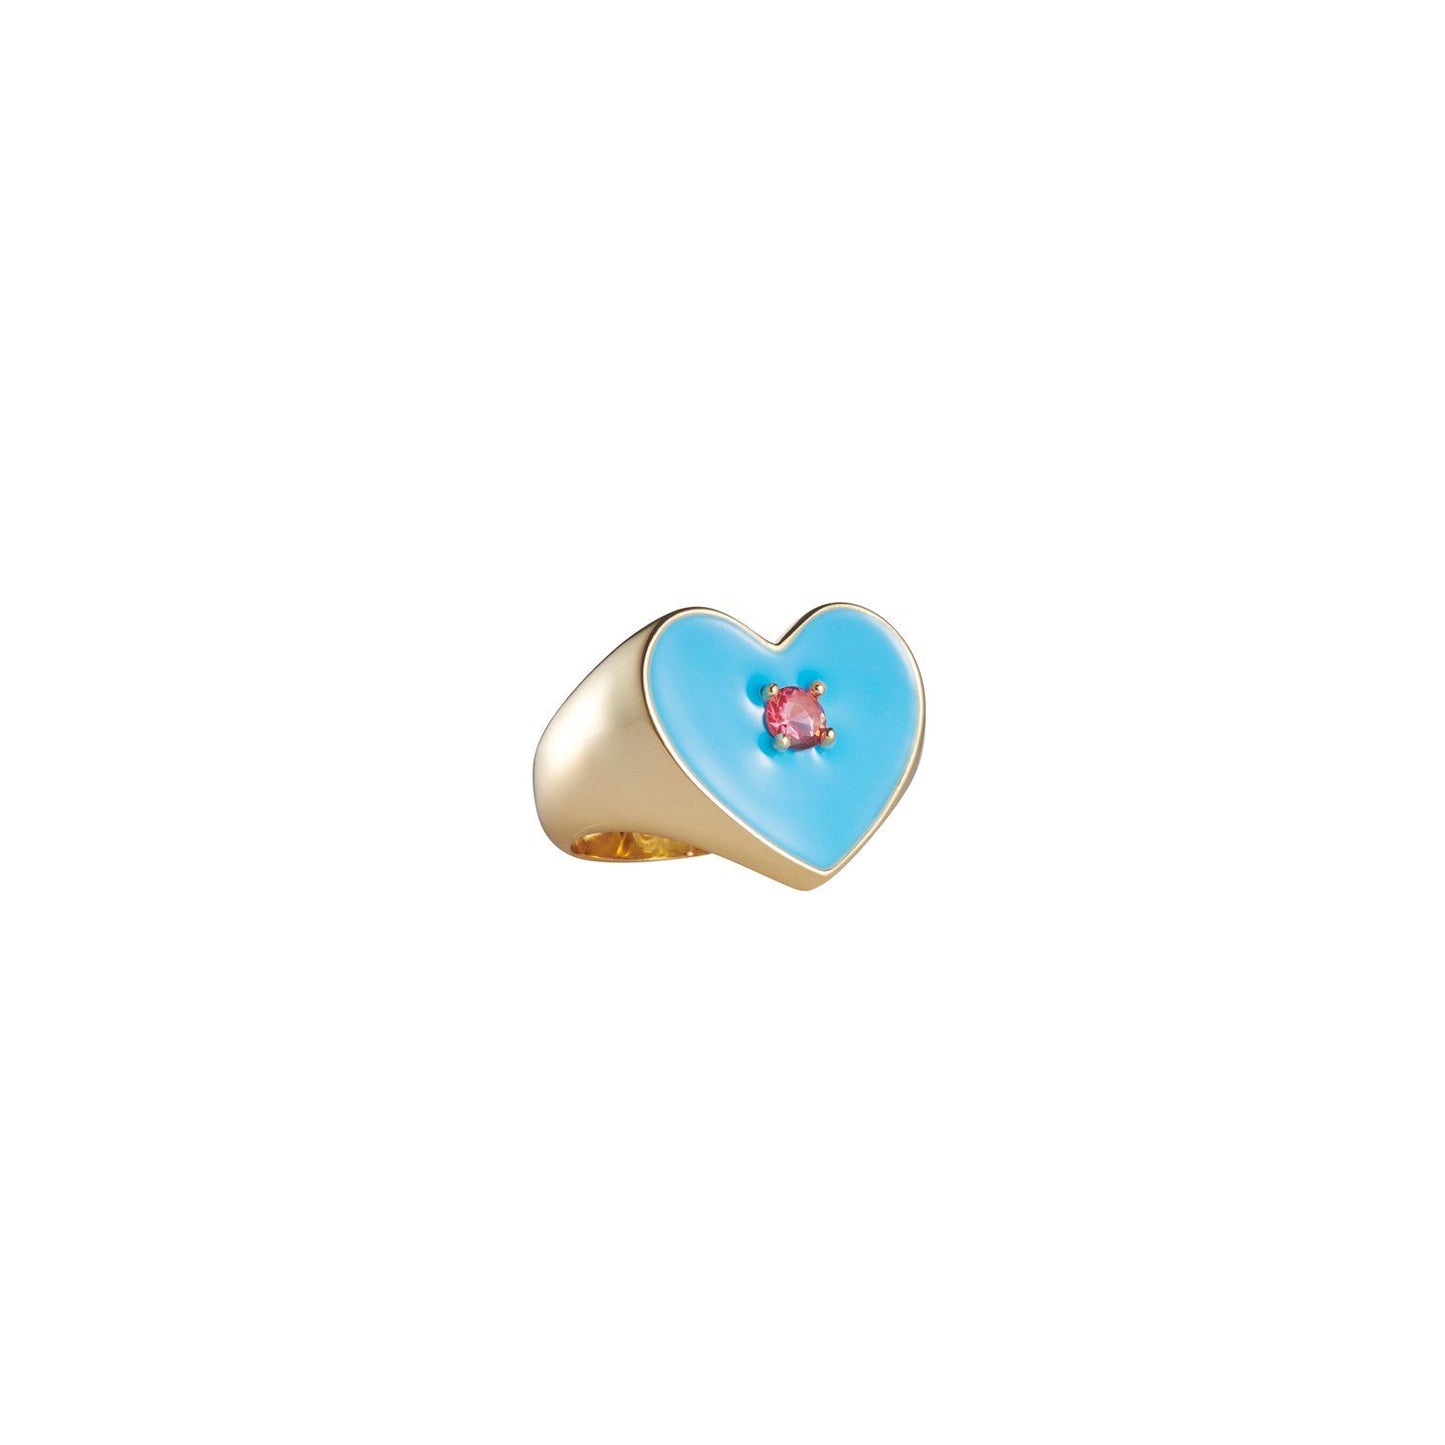 Chunky gold heart shaped ring with blue enamel and pink stone